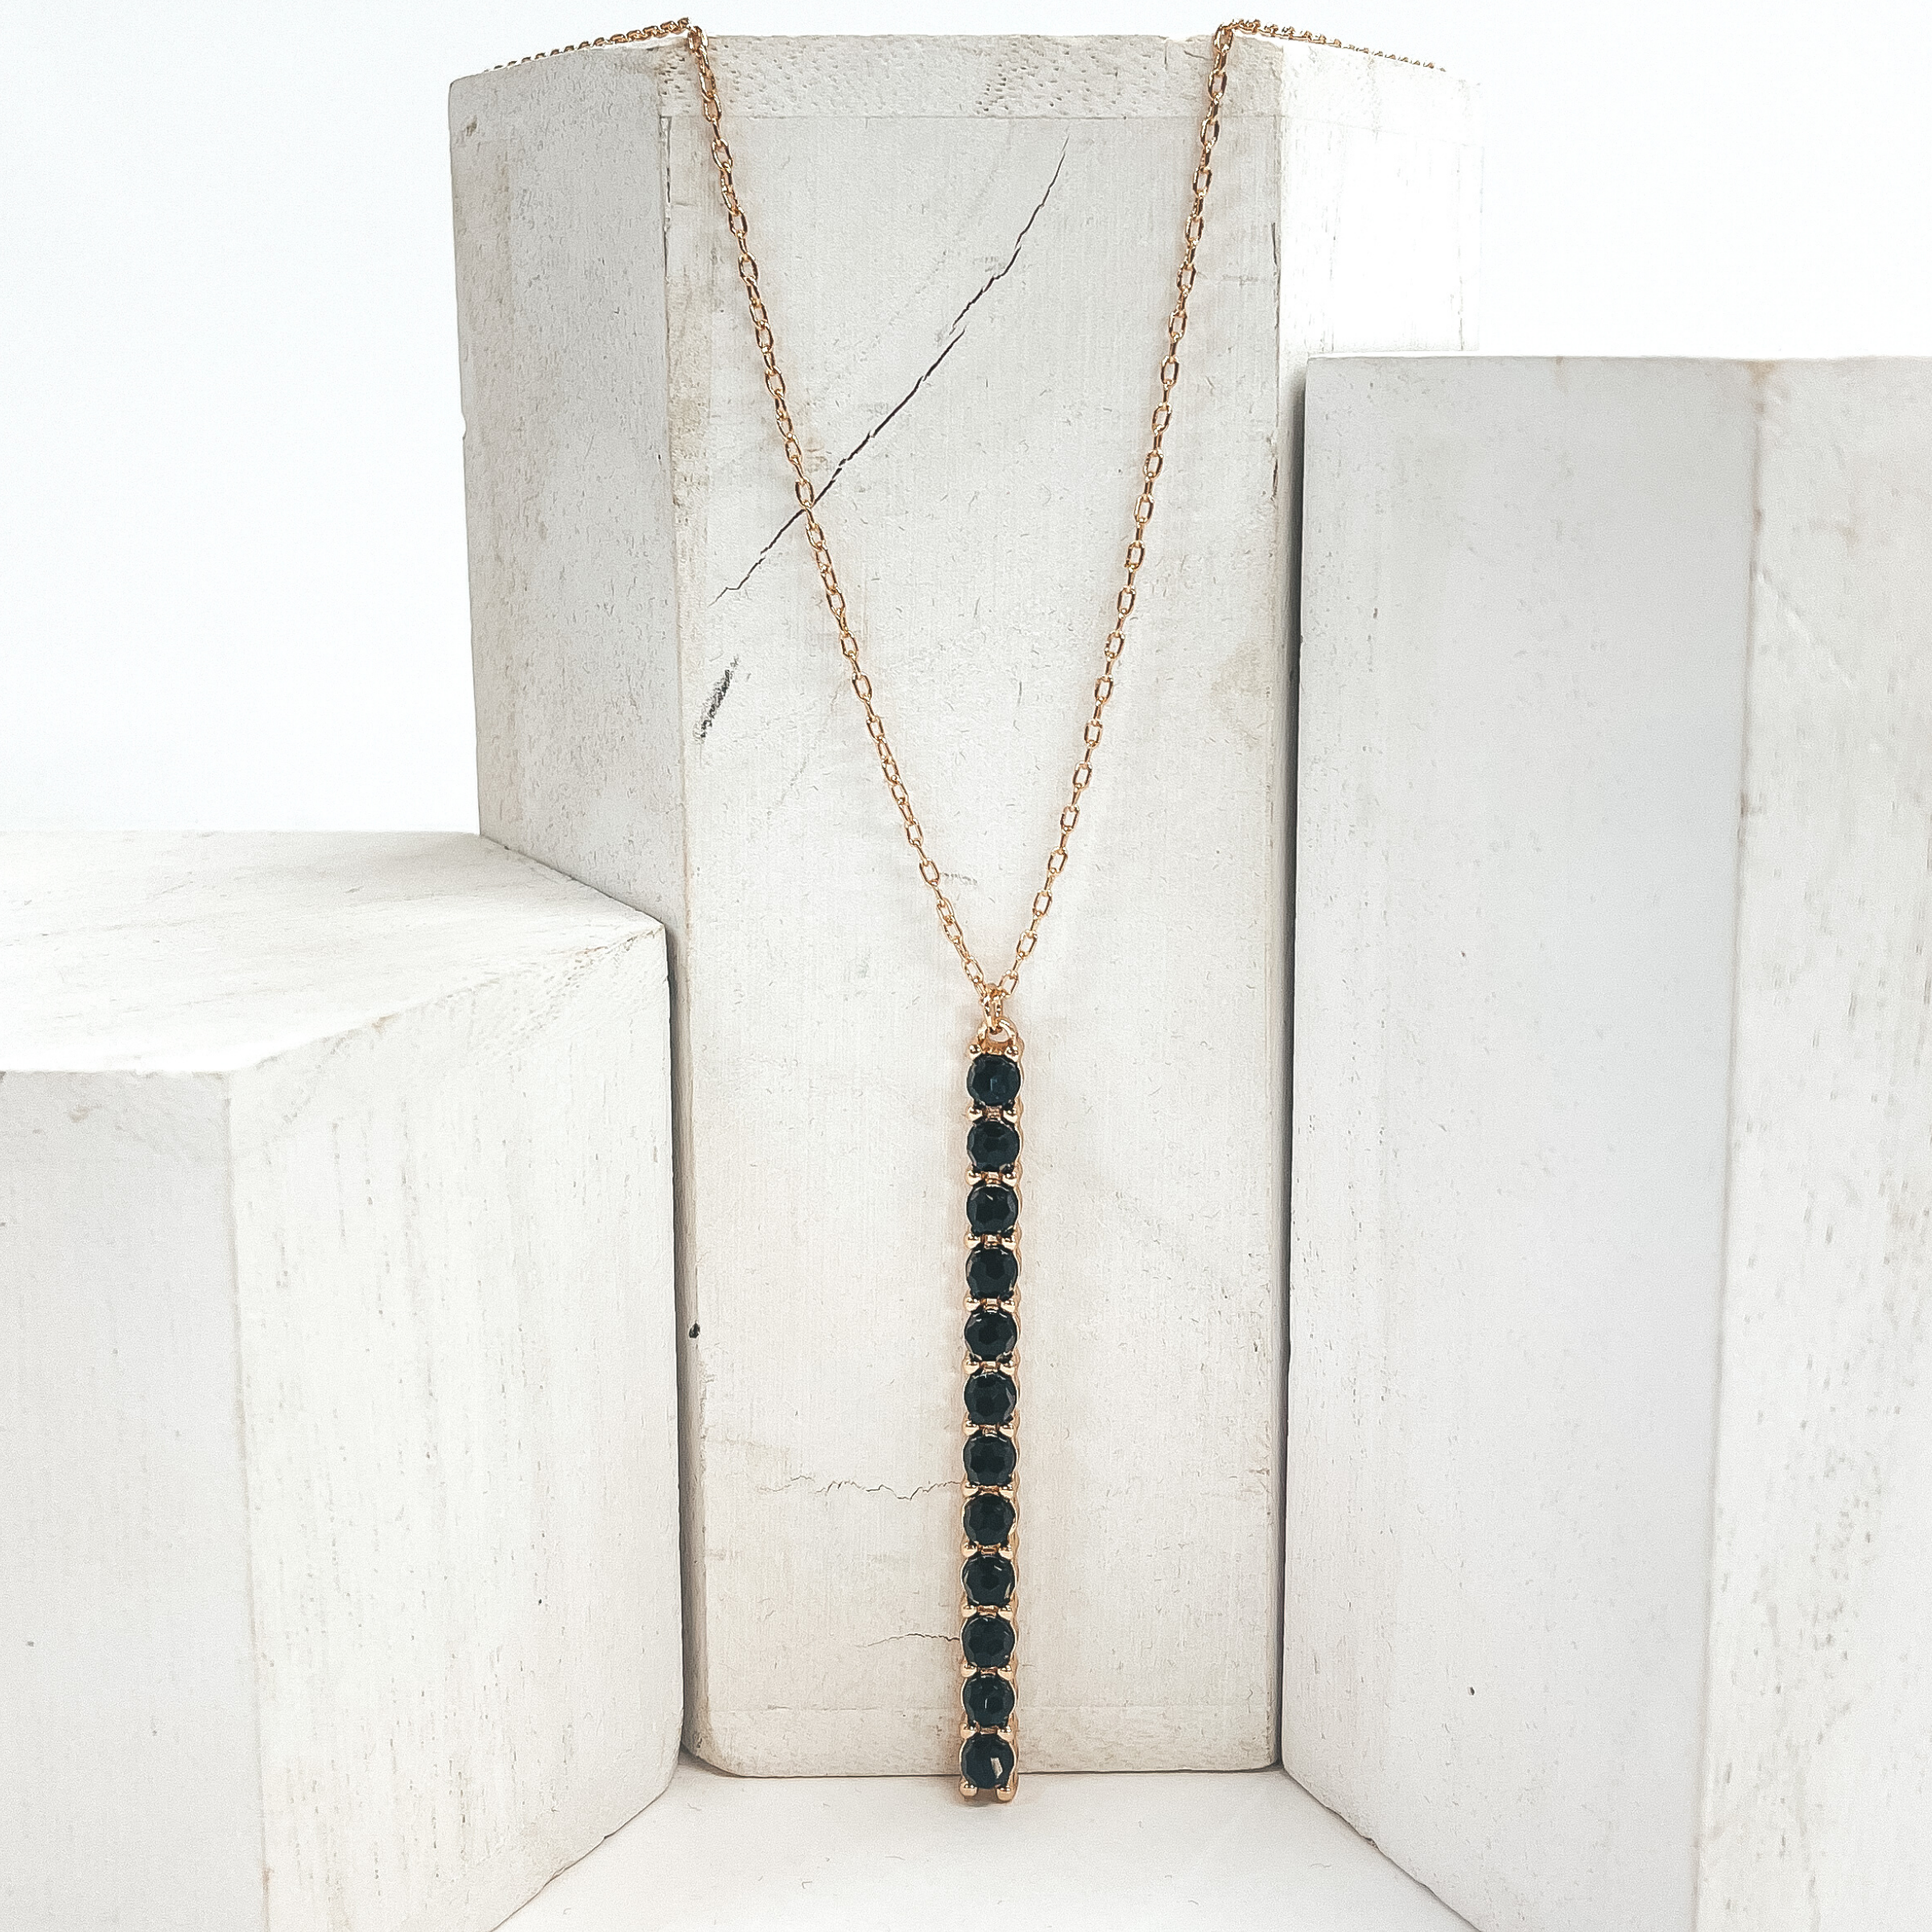 This is a 30 inch adjustable gold necklace with  a gold 2.75 inch bar pendant with black crystal  beads. This necklace is pictured laying on a white  block on a white background with one white block on  each side.